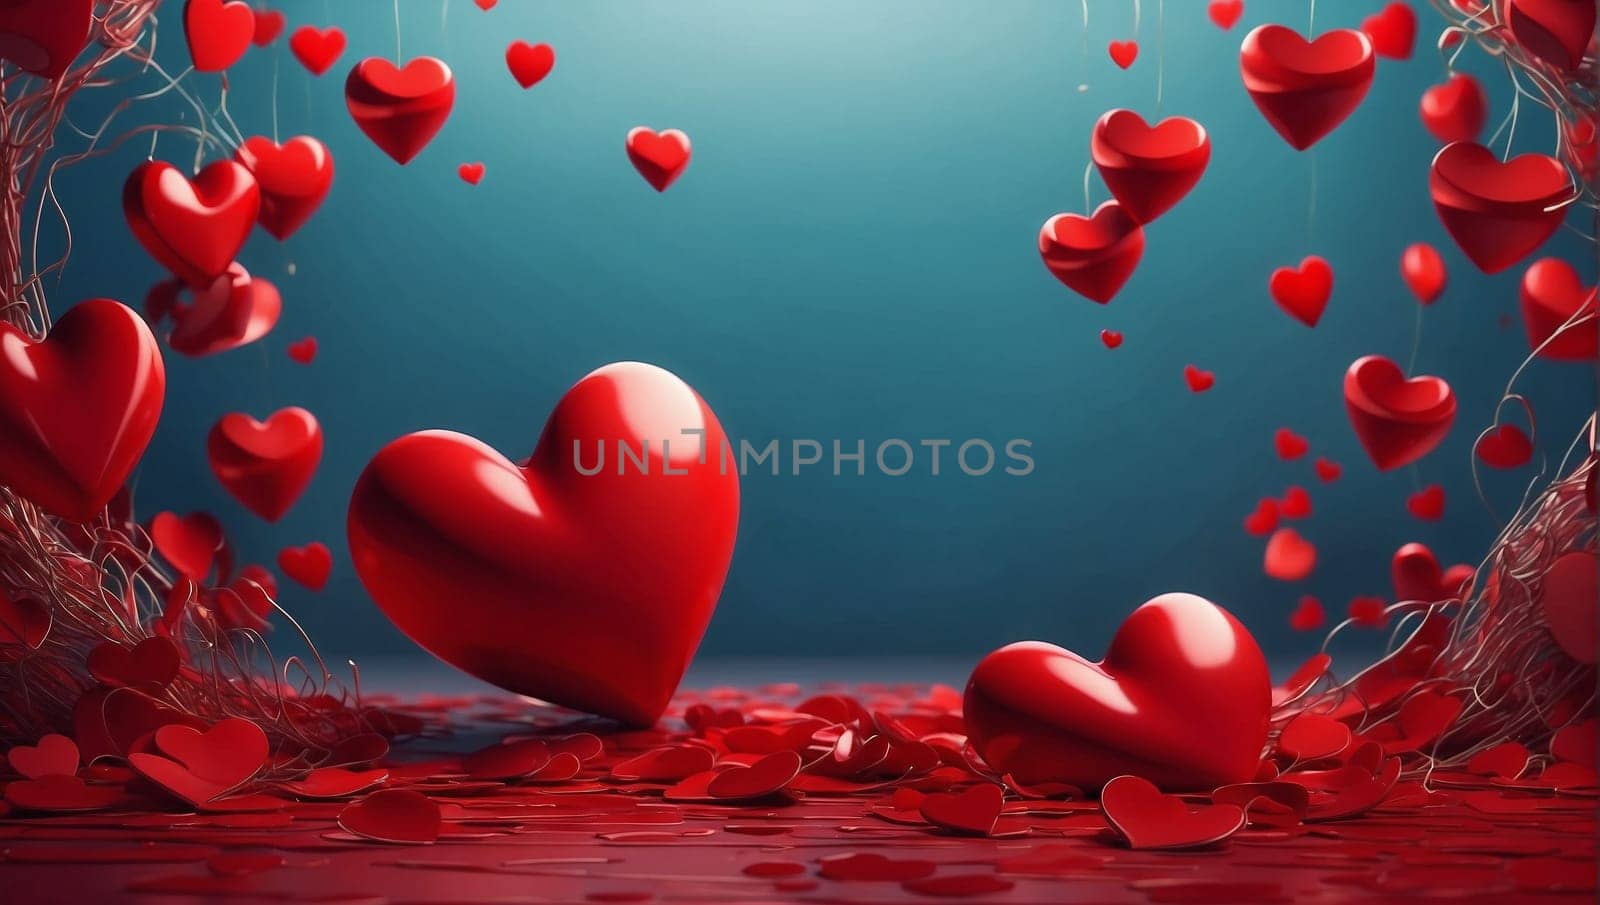 Capture the essence of love with our enchanting Valentine's Day photo. Celebrate romance with high-quality images of heartfelt moments and affectionate expressions